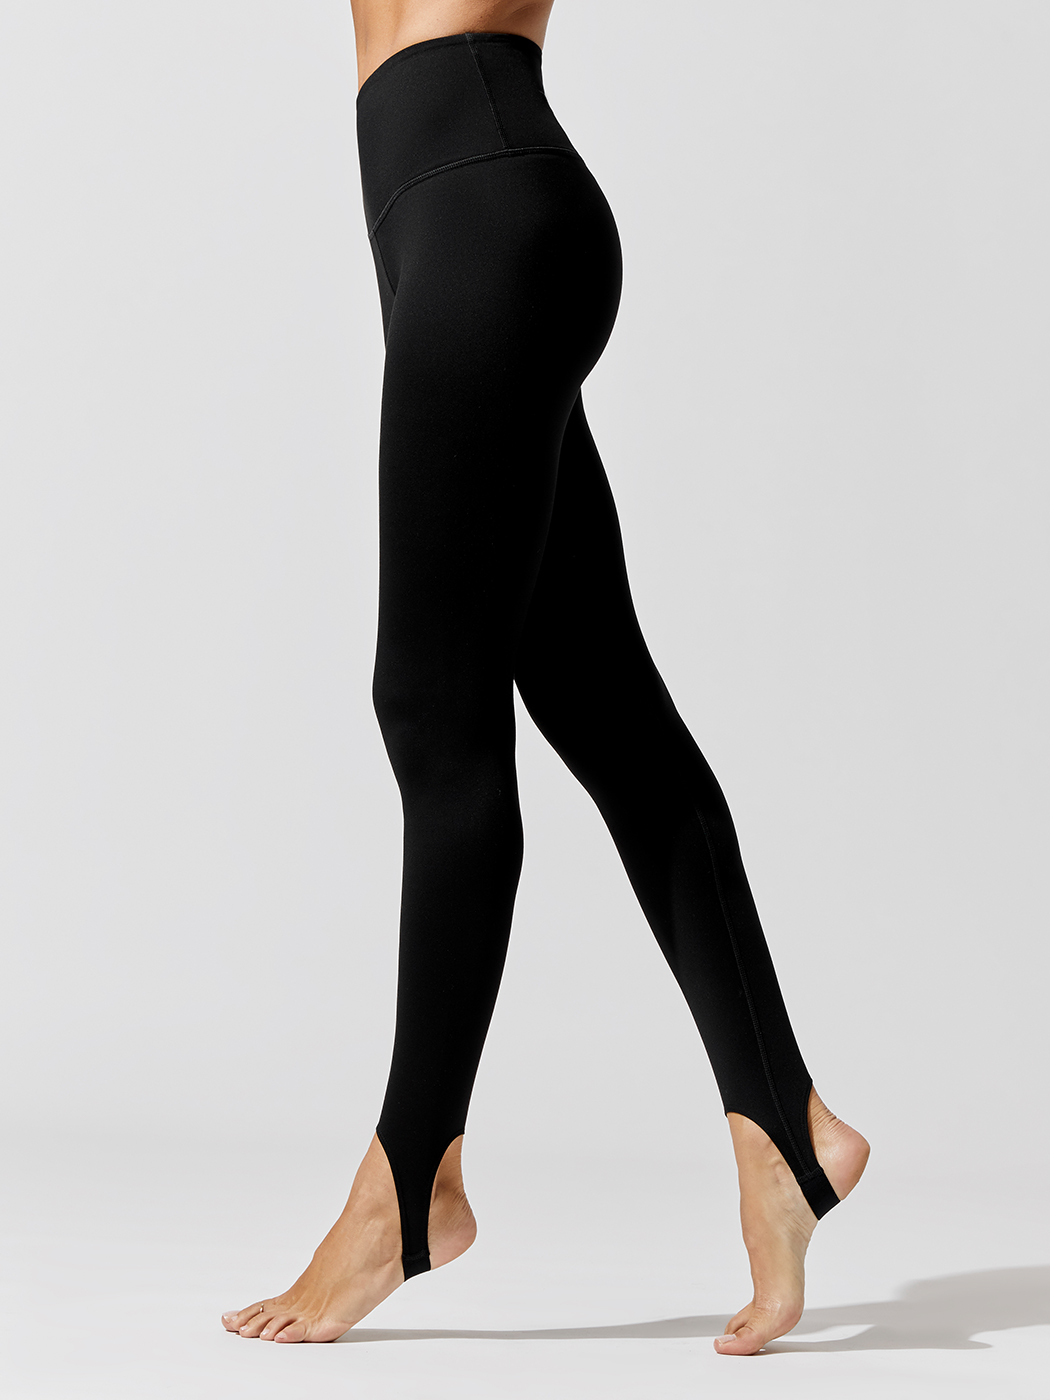 Stirrup Leggings, The Trendy Garment You Must Try – Onpost